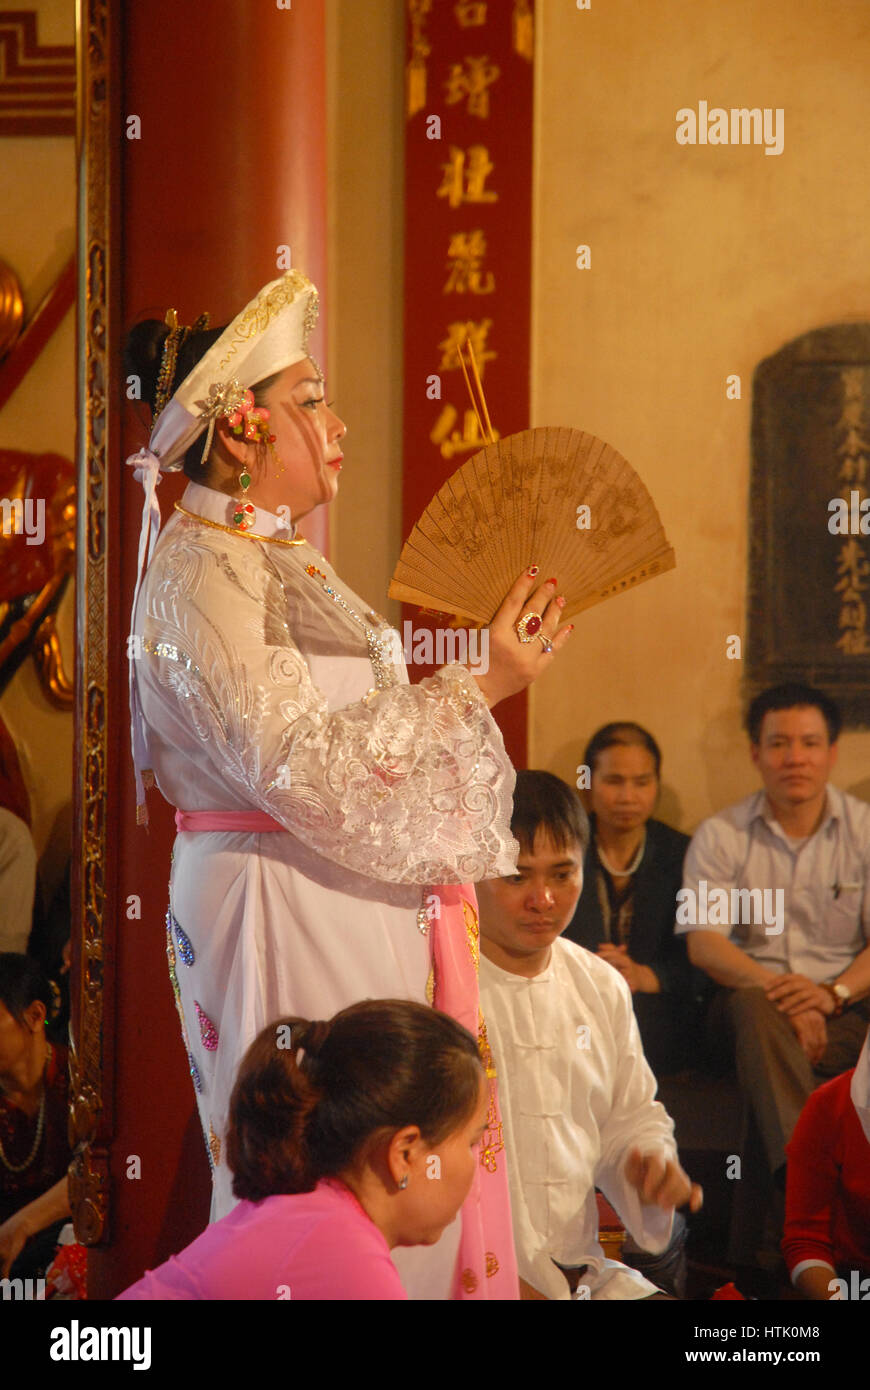 High Priestess handing out offerings in a temple, Hanoi, Vietnam. Stock Photo